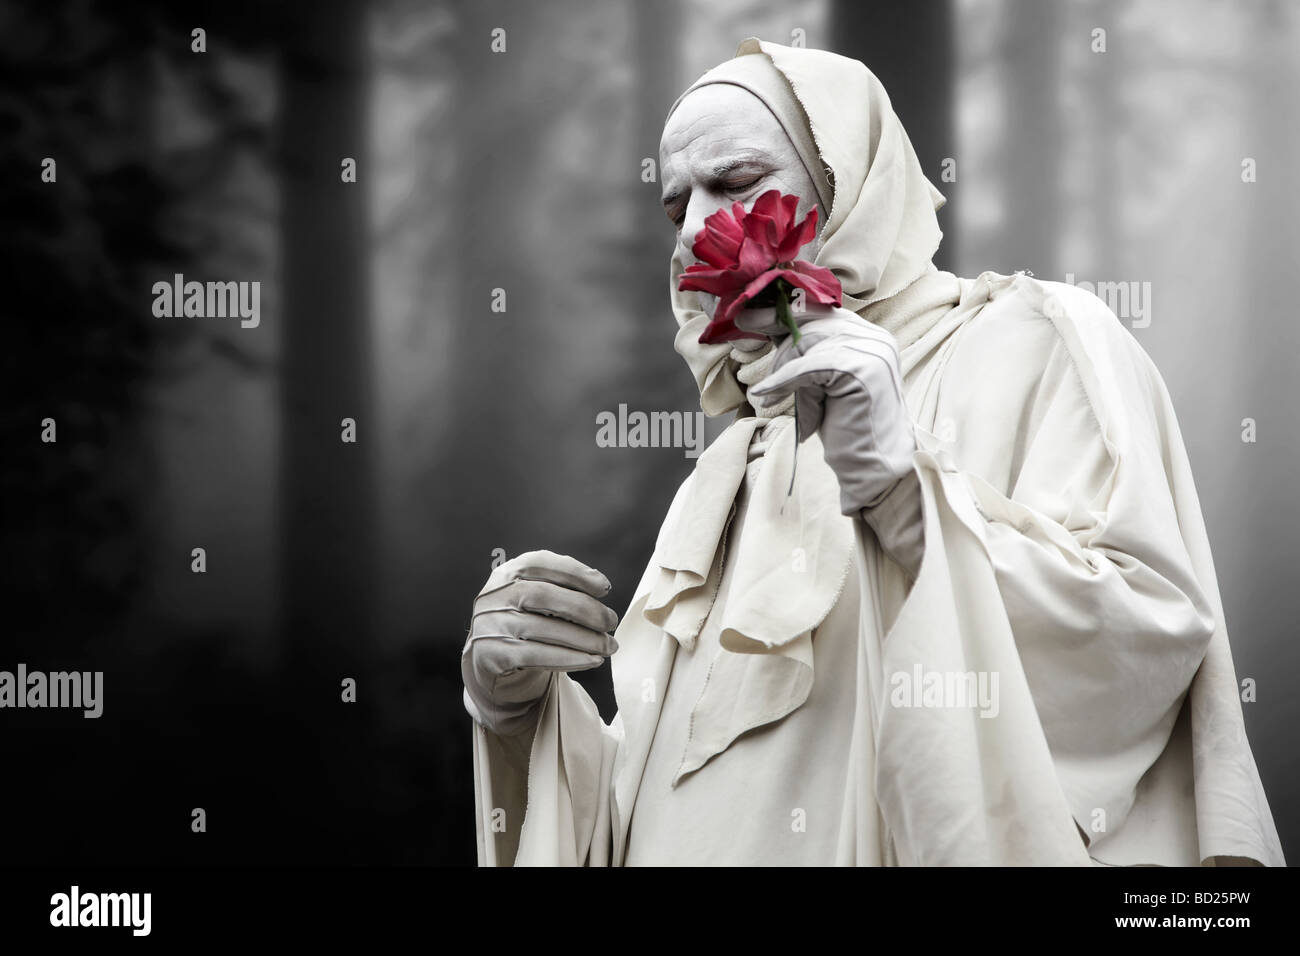 Man, wrapped in white cloth, holding a flower in his hand, wandering through a foggy forest Stock Photo